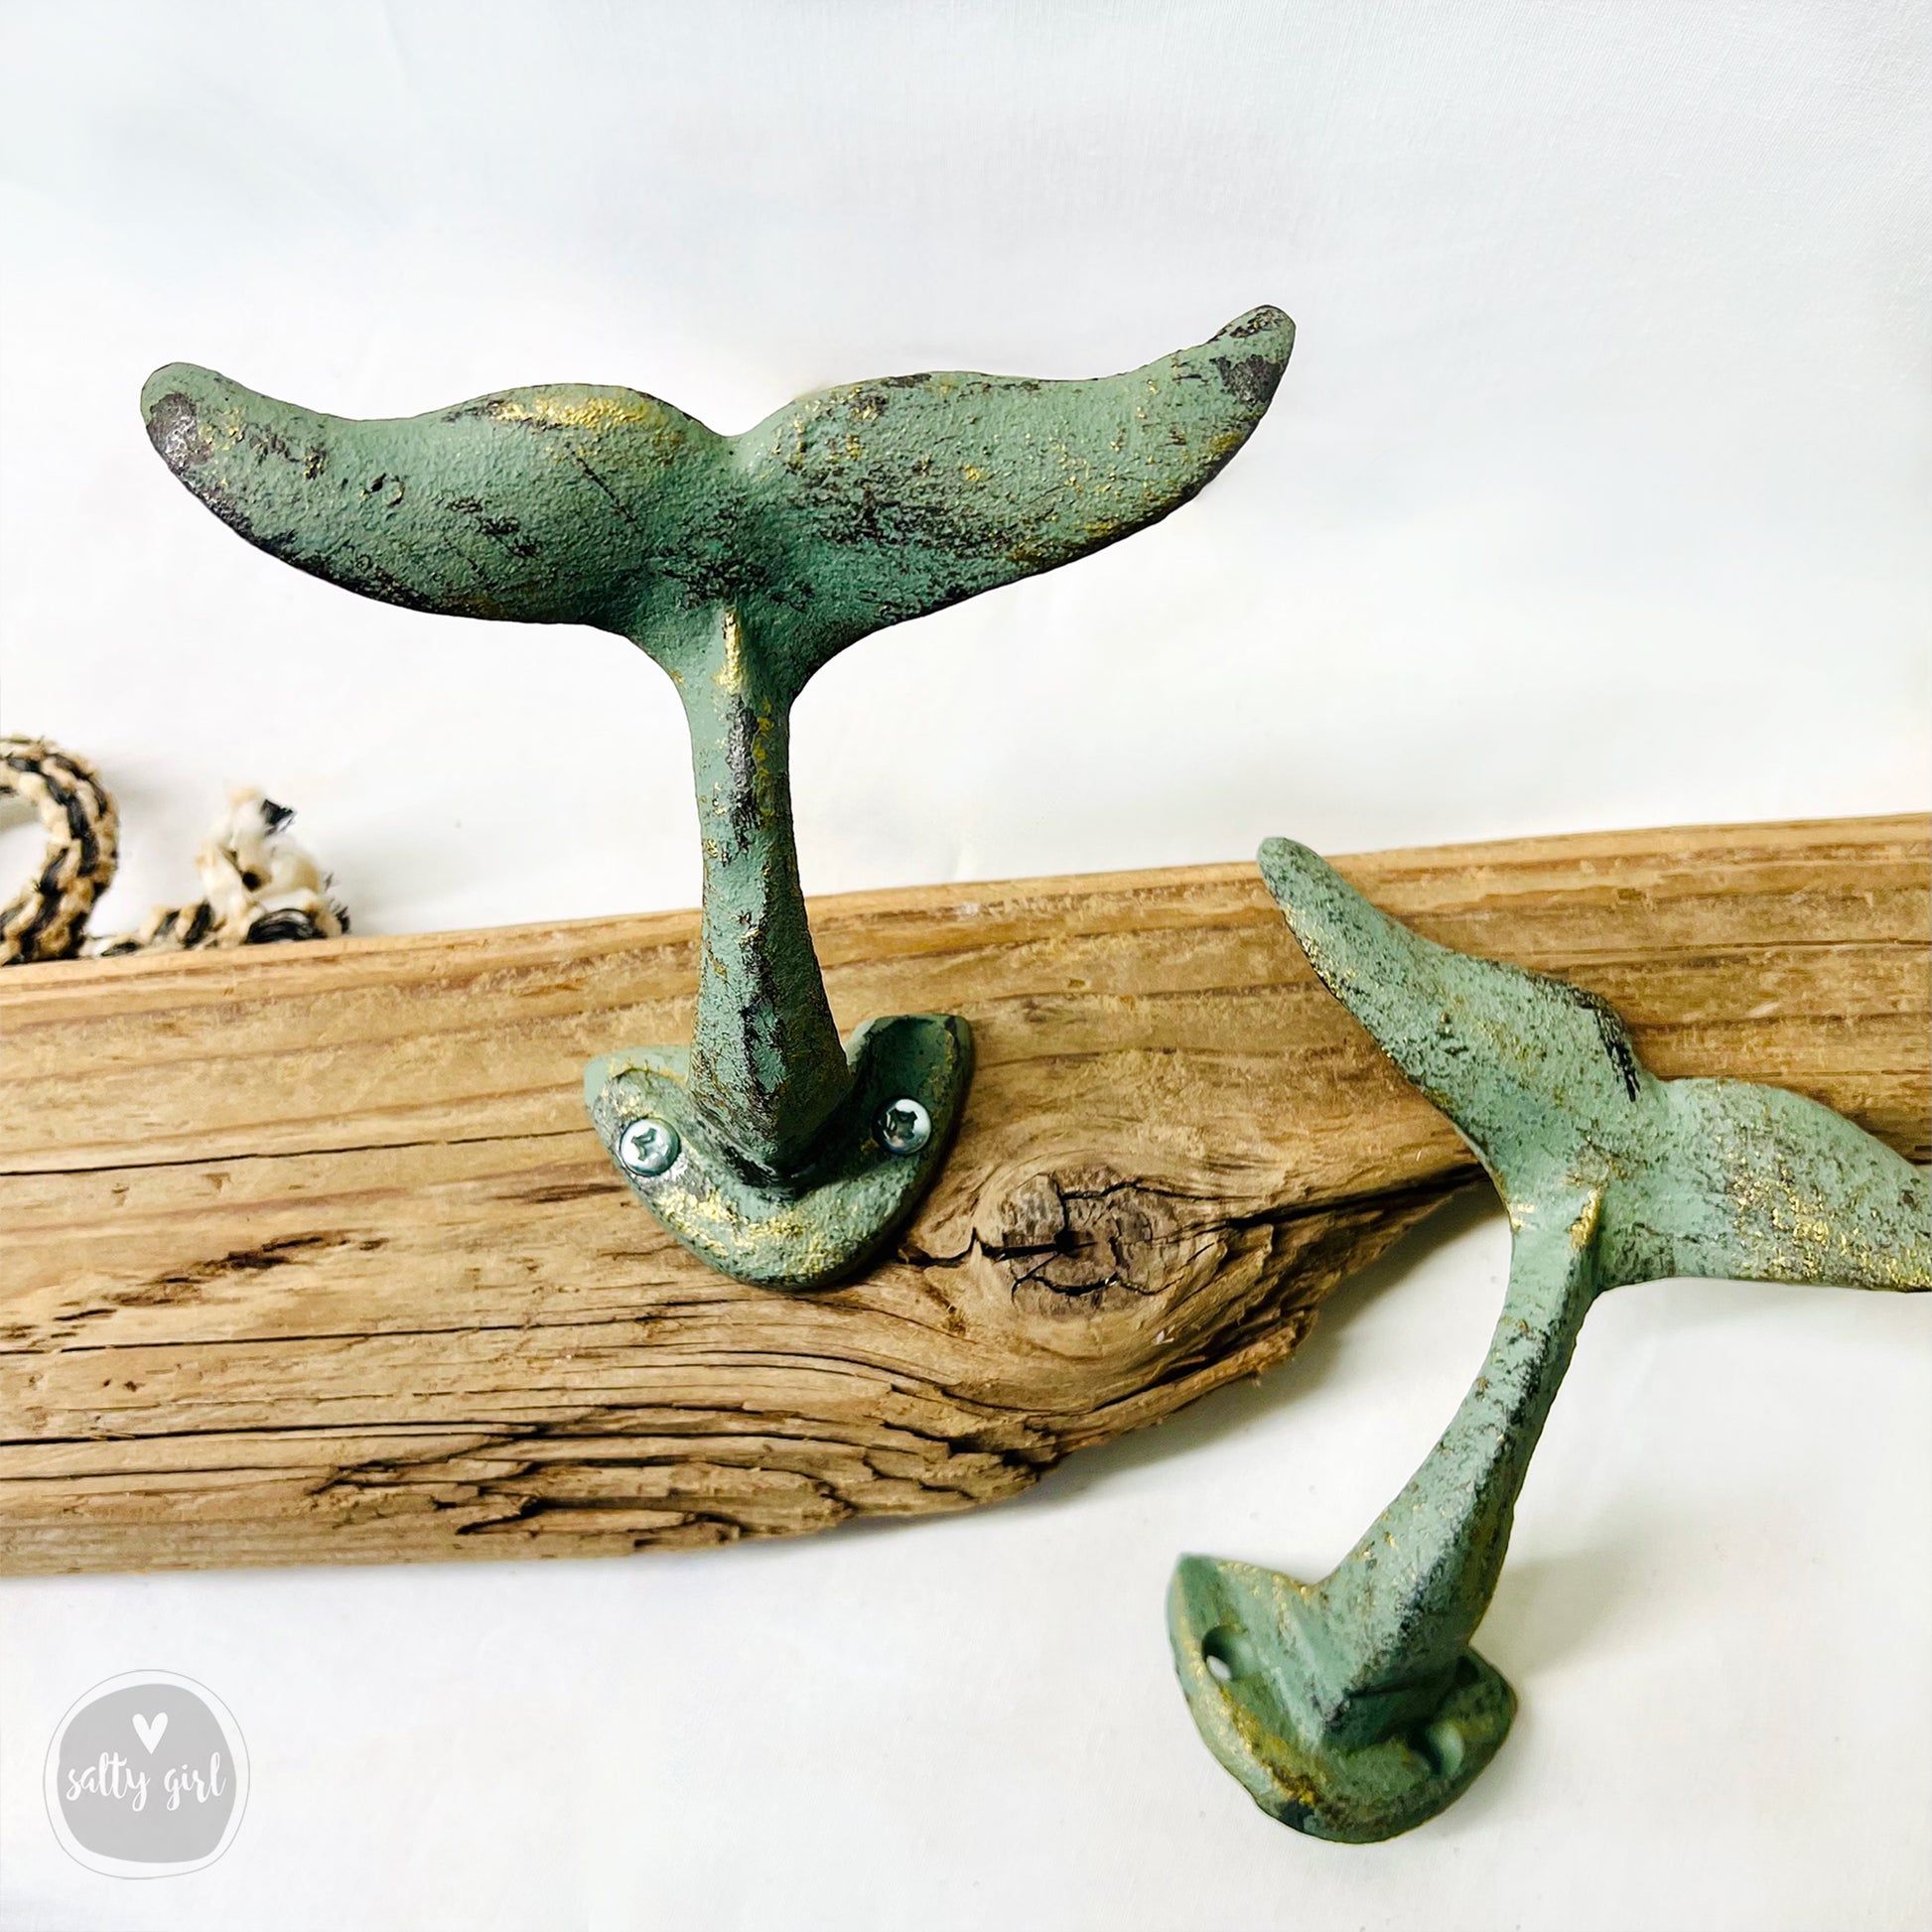 Whale Tail Ocean Themed Cast Iron Towel Robe Coat Hook - Moose-R